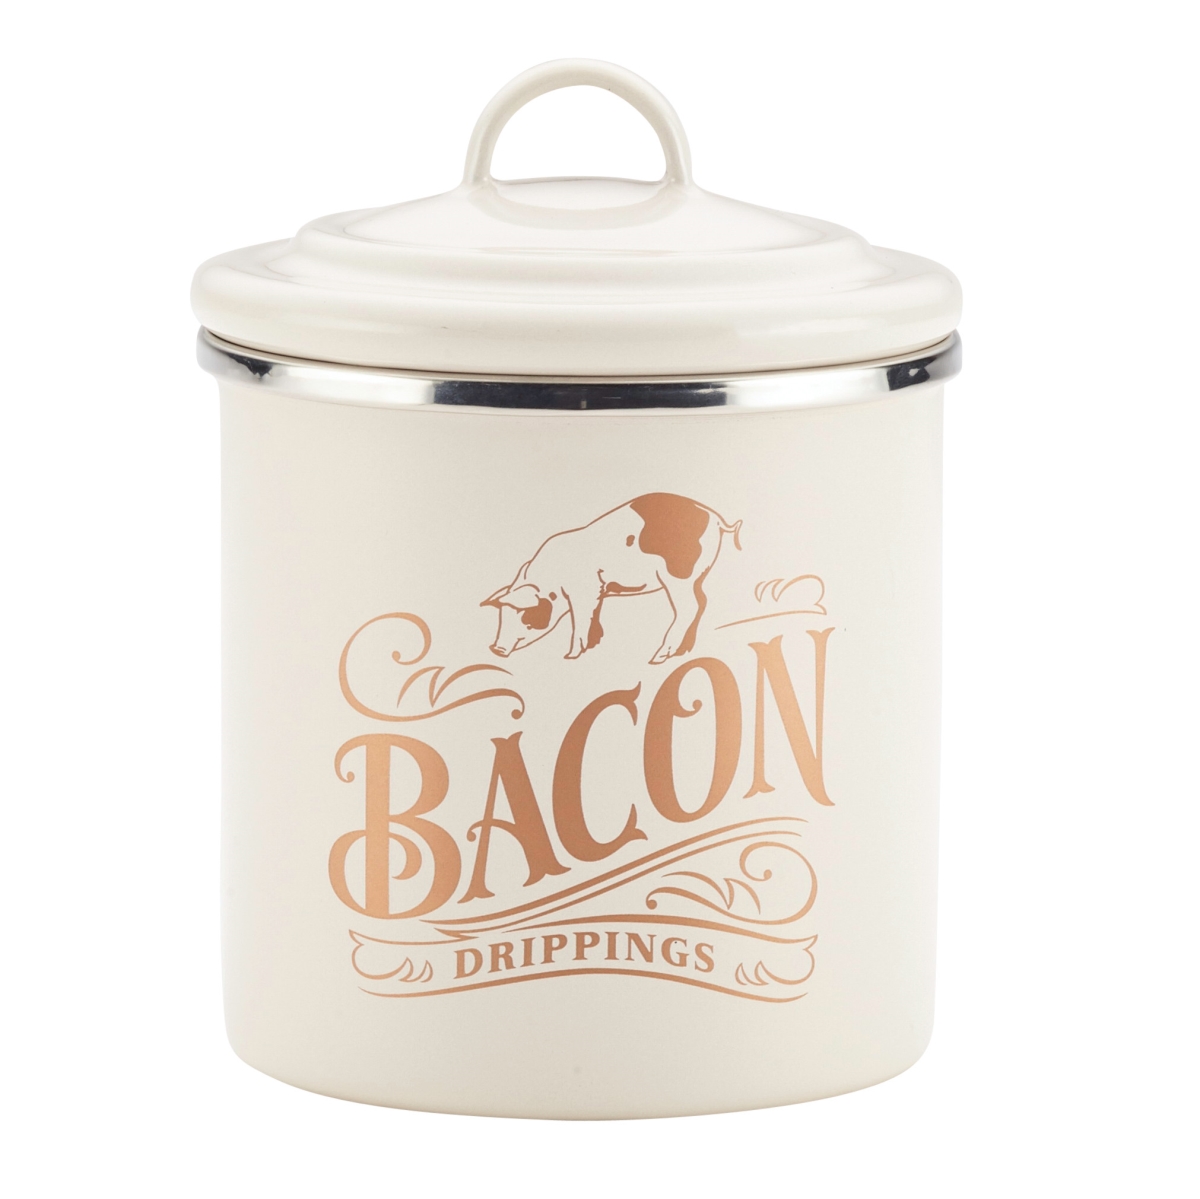 47417 Enamel On Steel Bacon Grease Can, 4 X 4 In. - French Vanilla